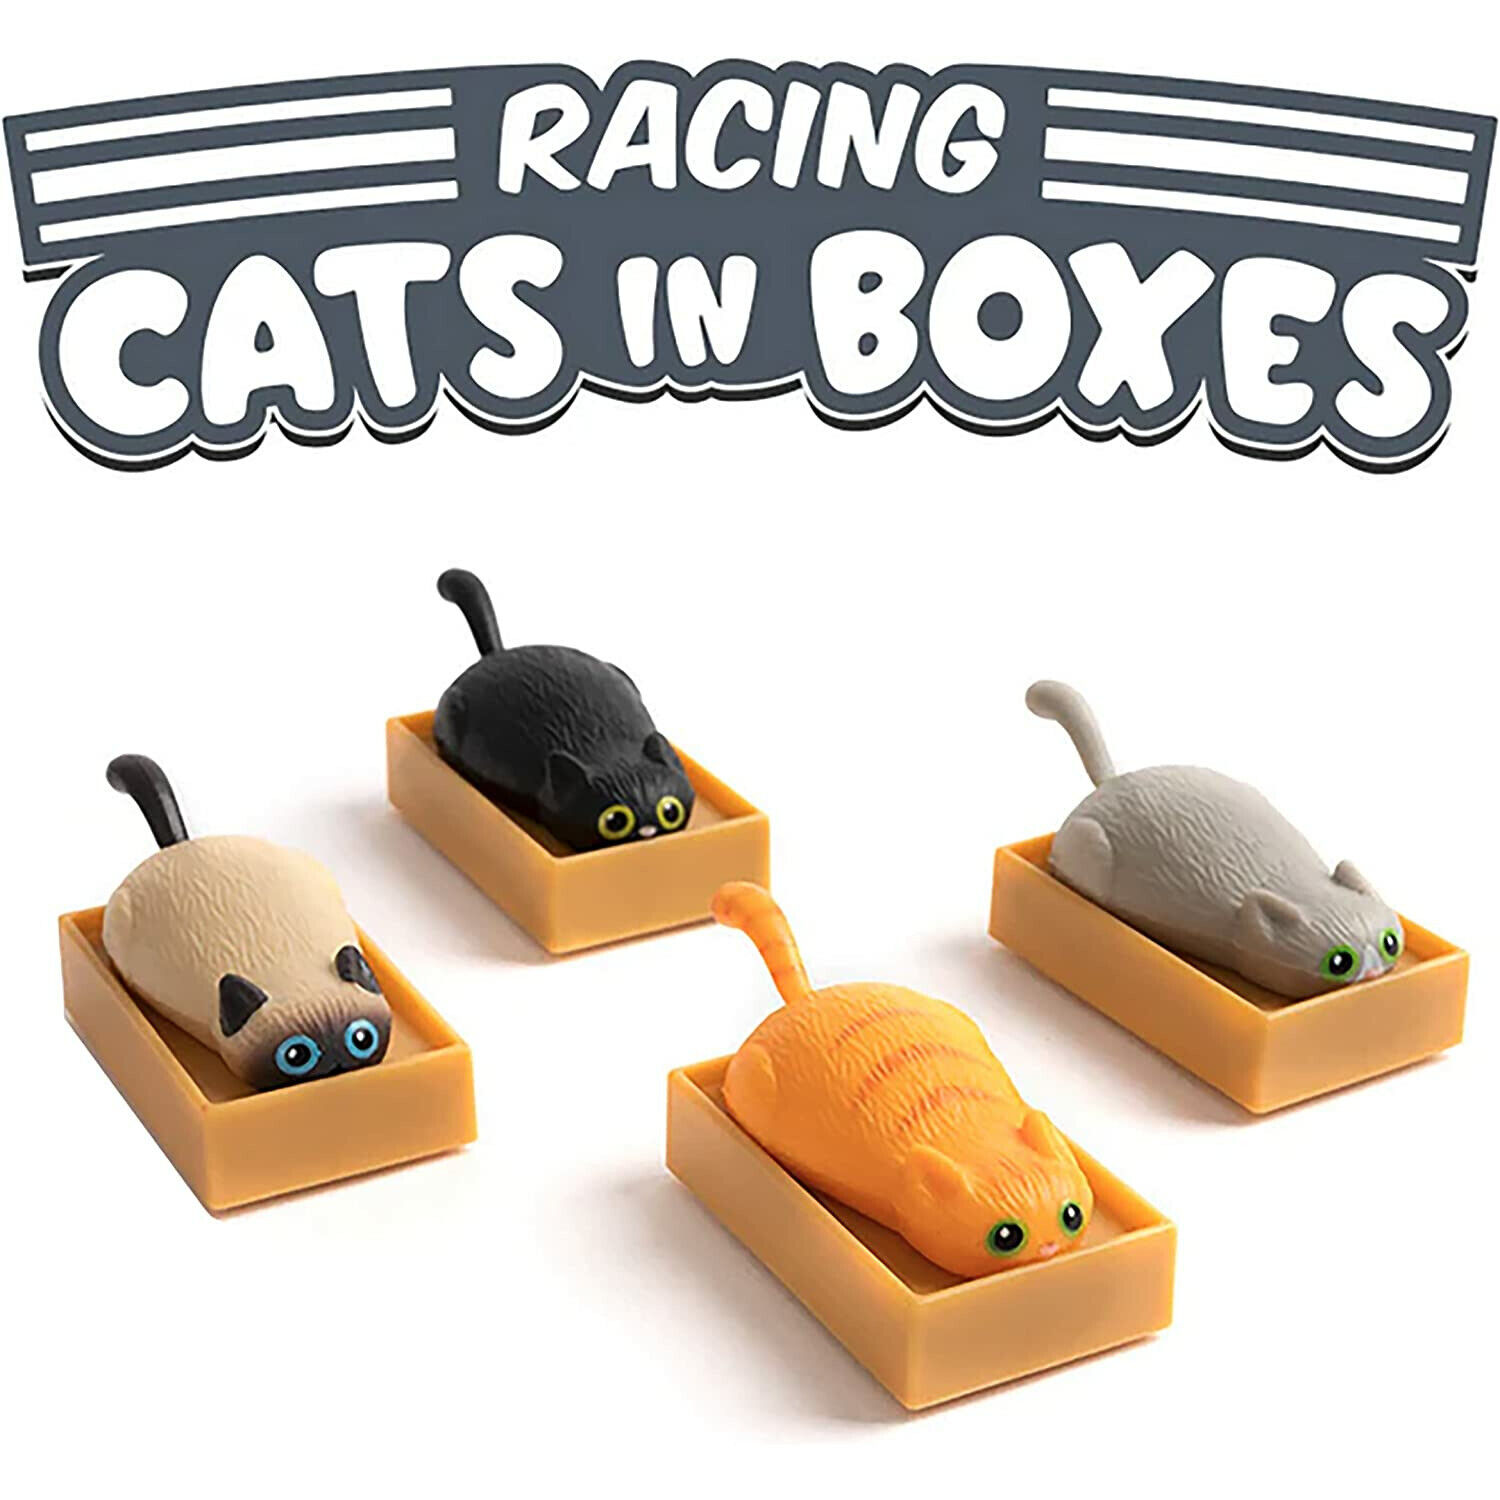 Racing Cats In Boxes Pullback Toy Car - Set of 4